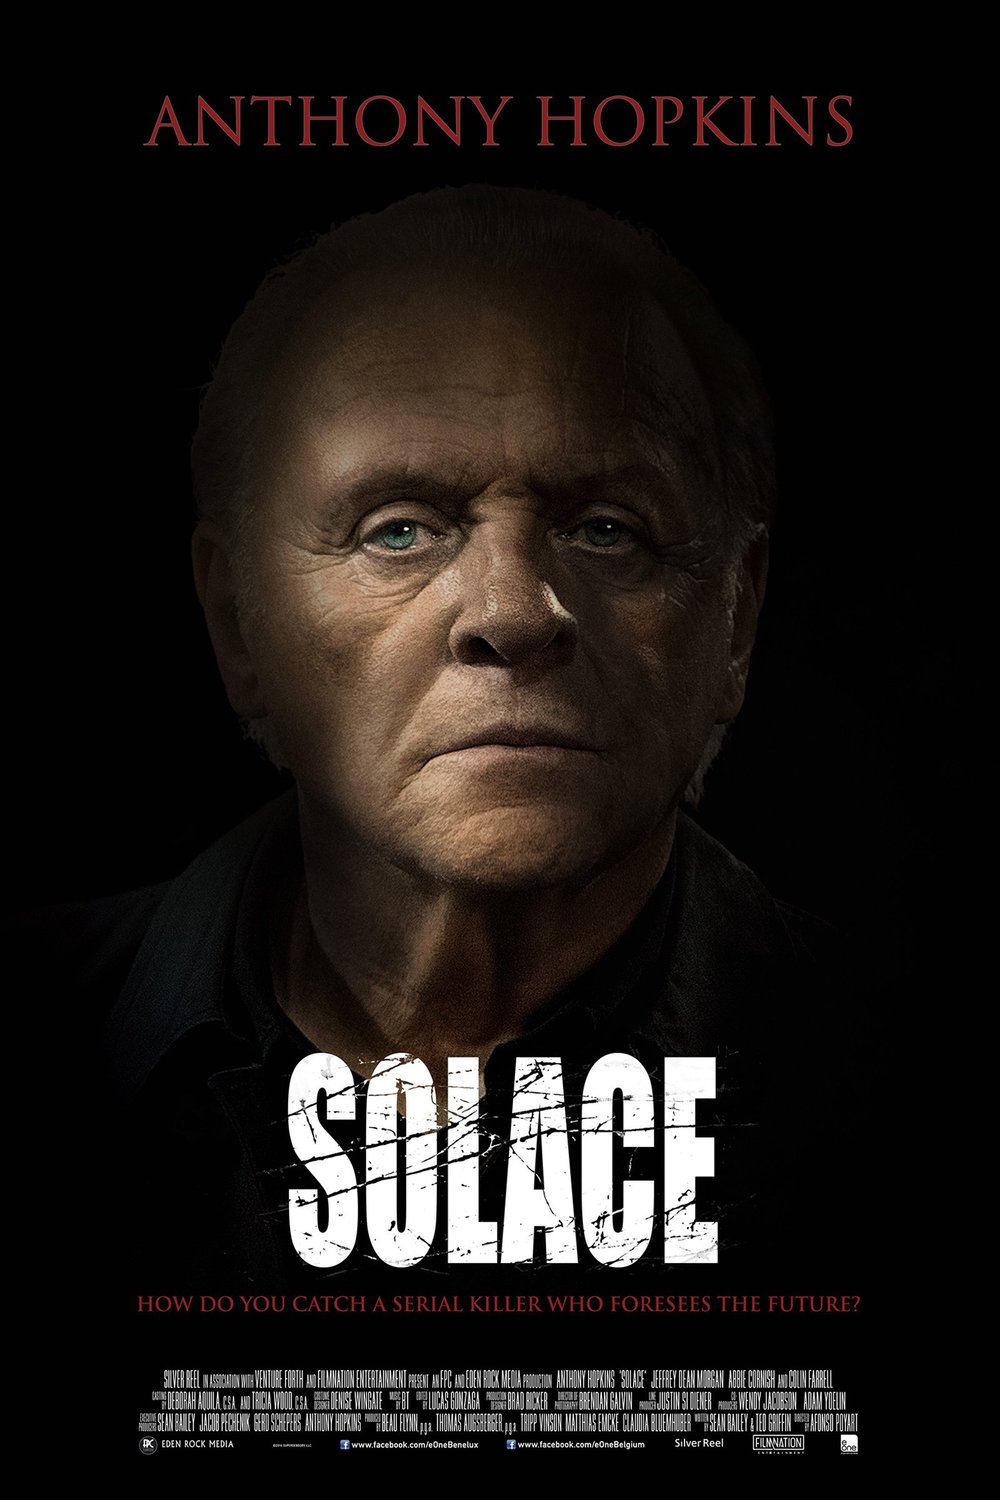 2015 Solace